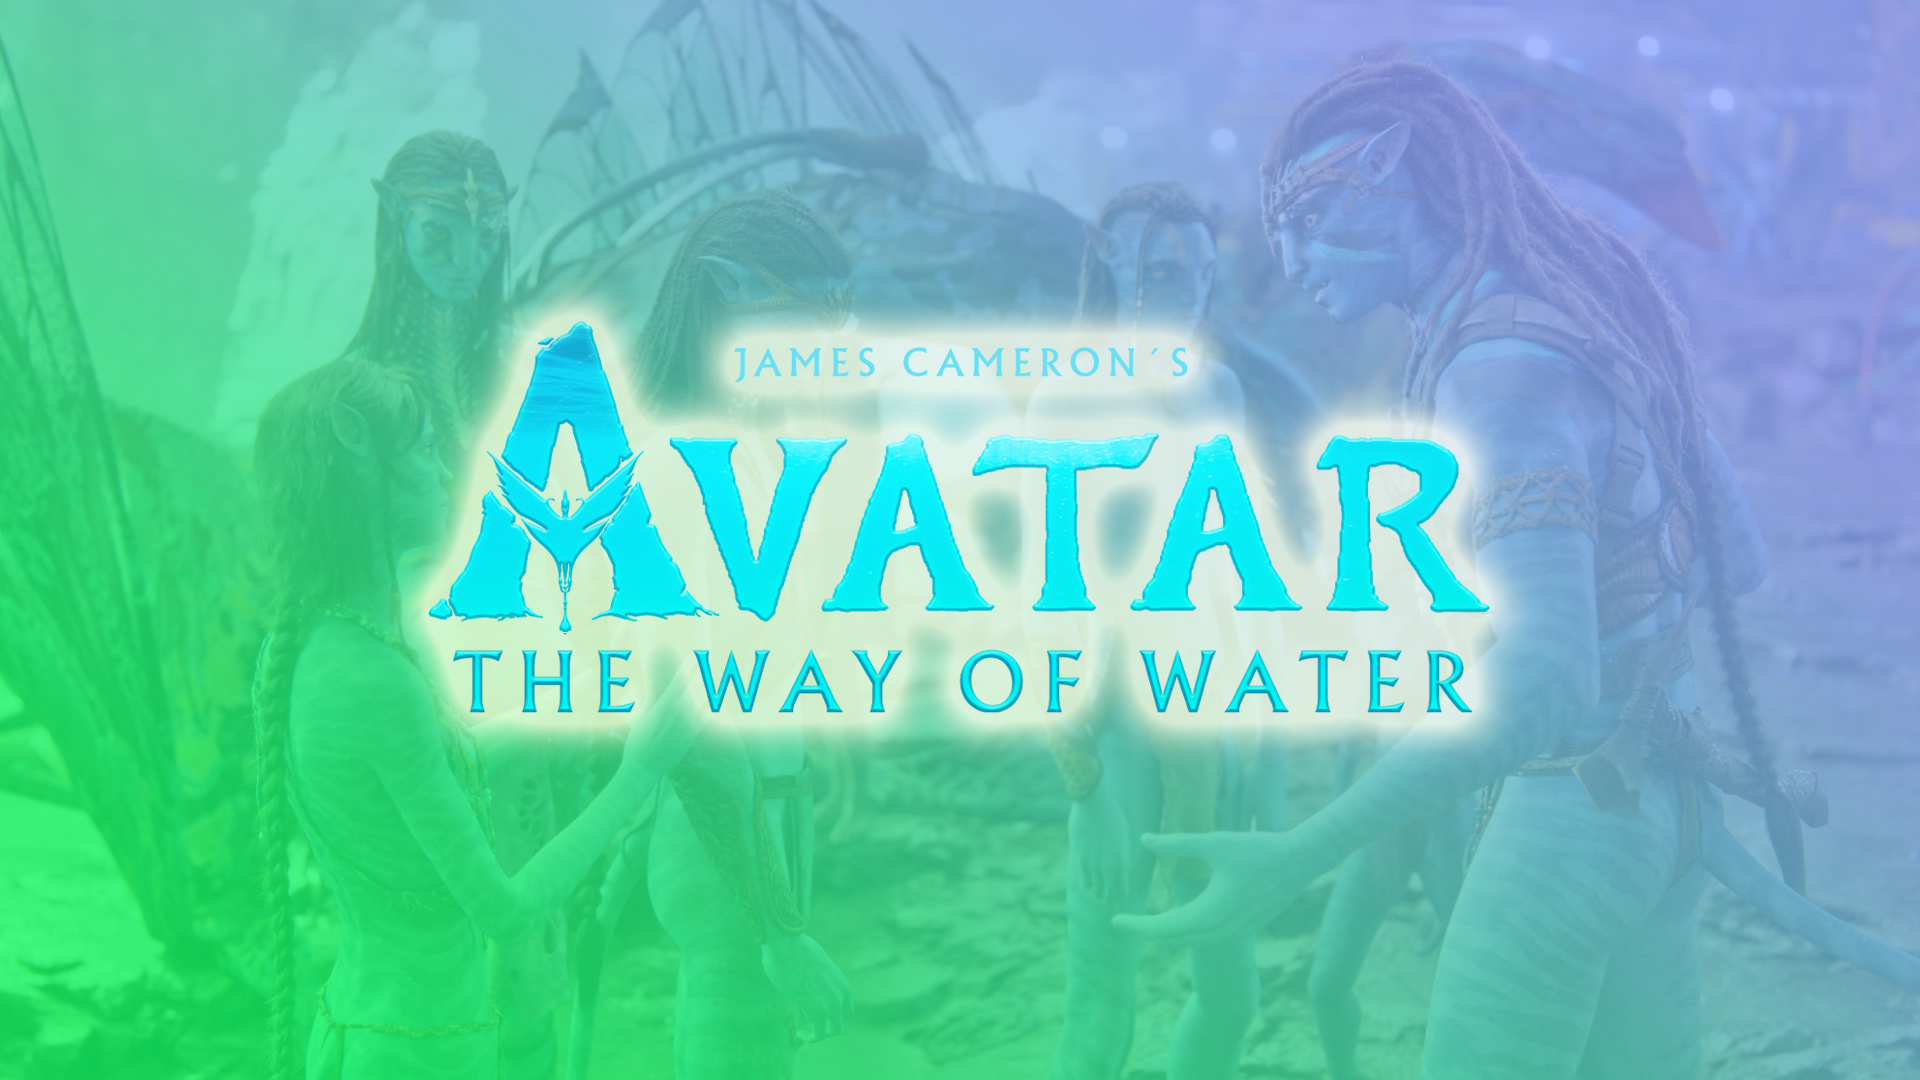 Disney lowered its sales predictions for the Avatar sequel